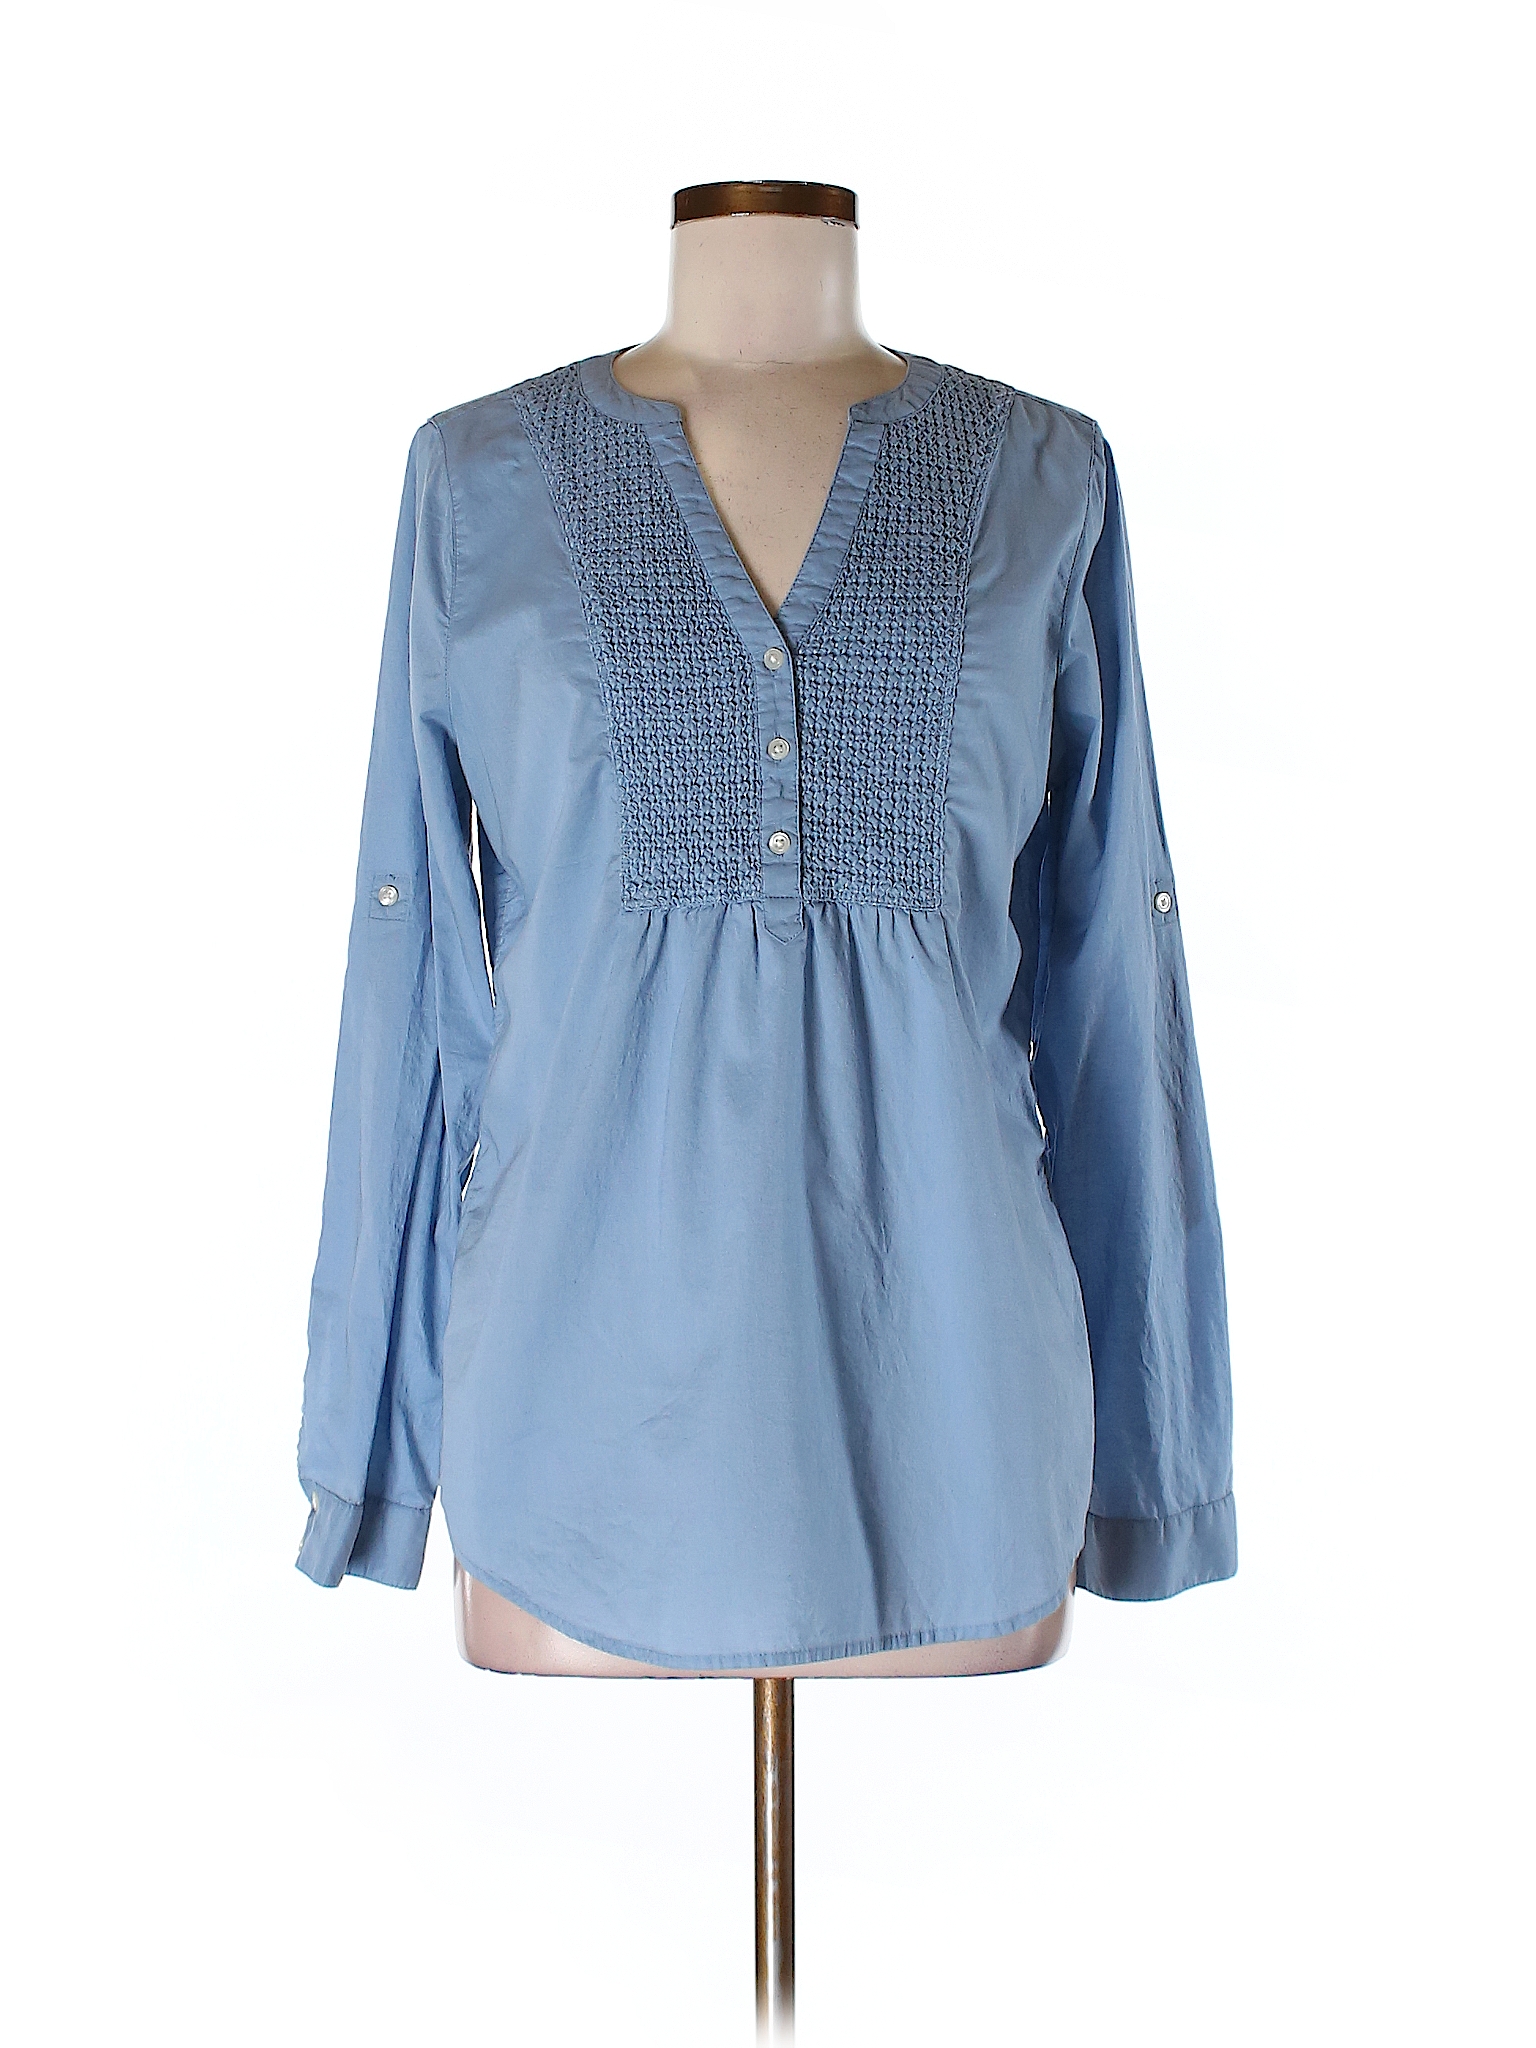 Gap Outlet 100% Cotton Solid Blue Long Sleeve Blouse Size M - 73% off ...